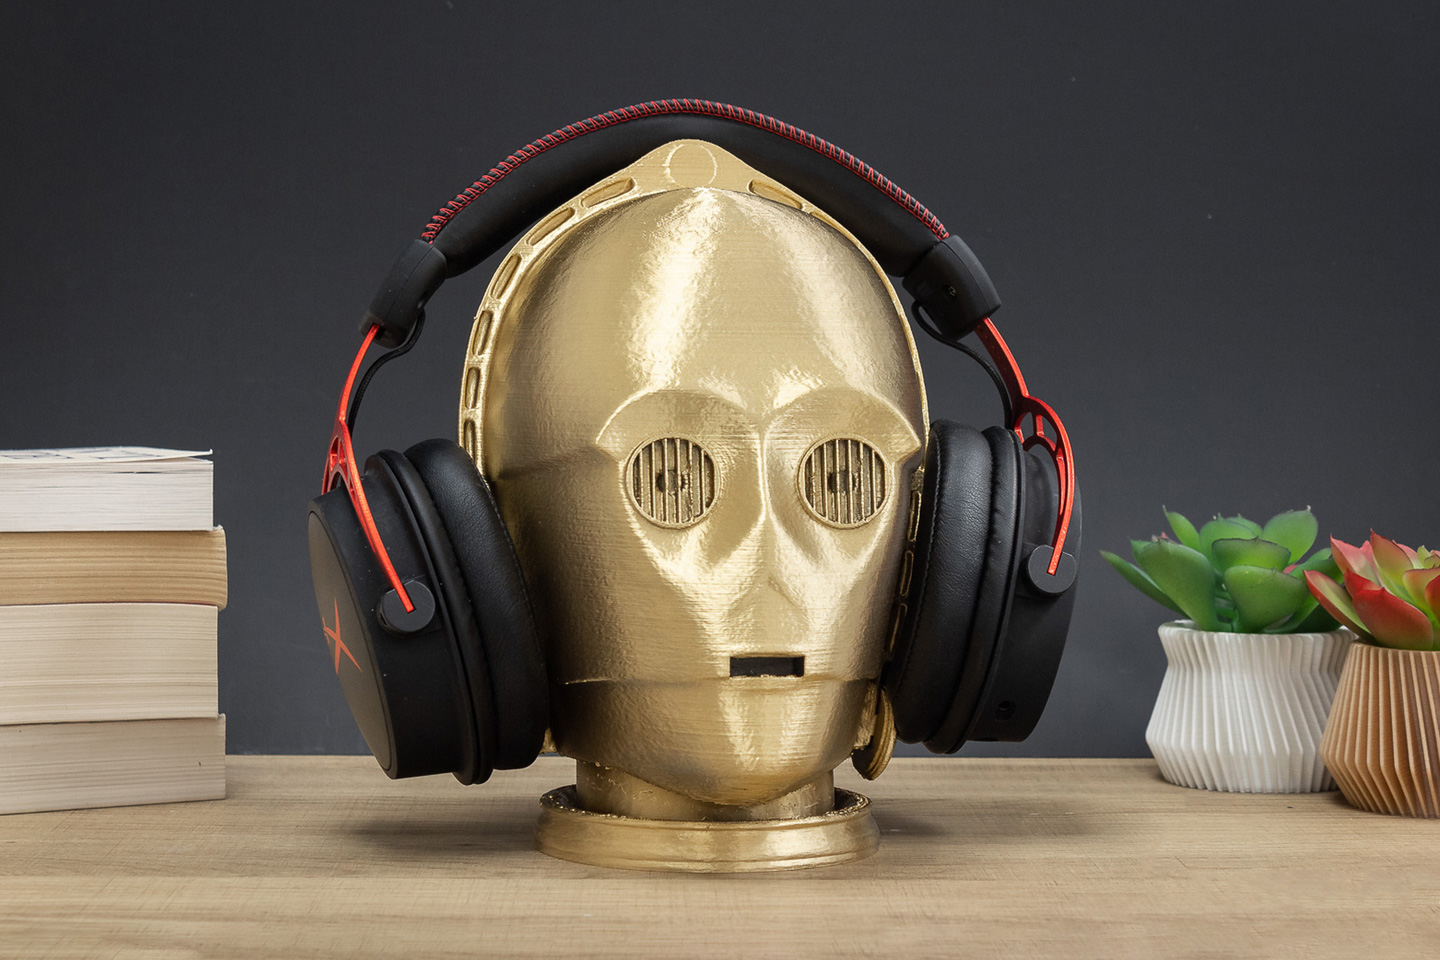 #Star Wars inspired 3D-printed headphone stands are the perfect accessory to celebrate May the 4th!